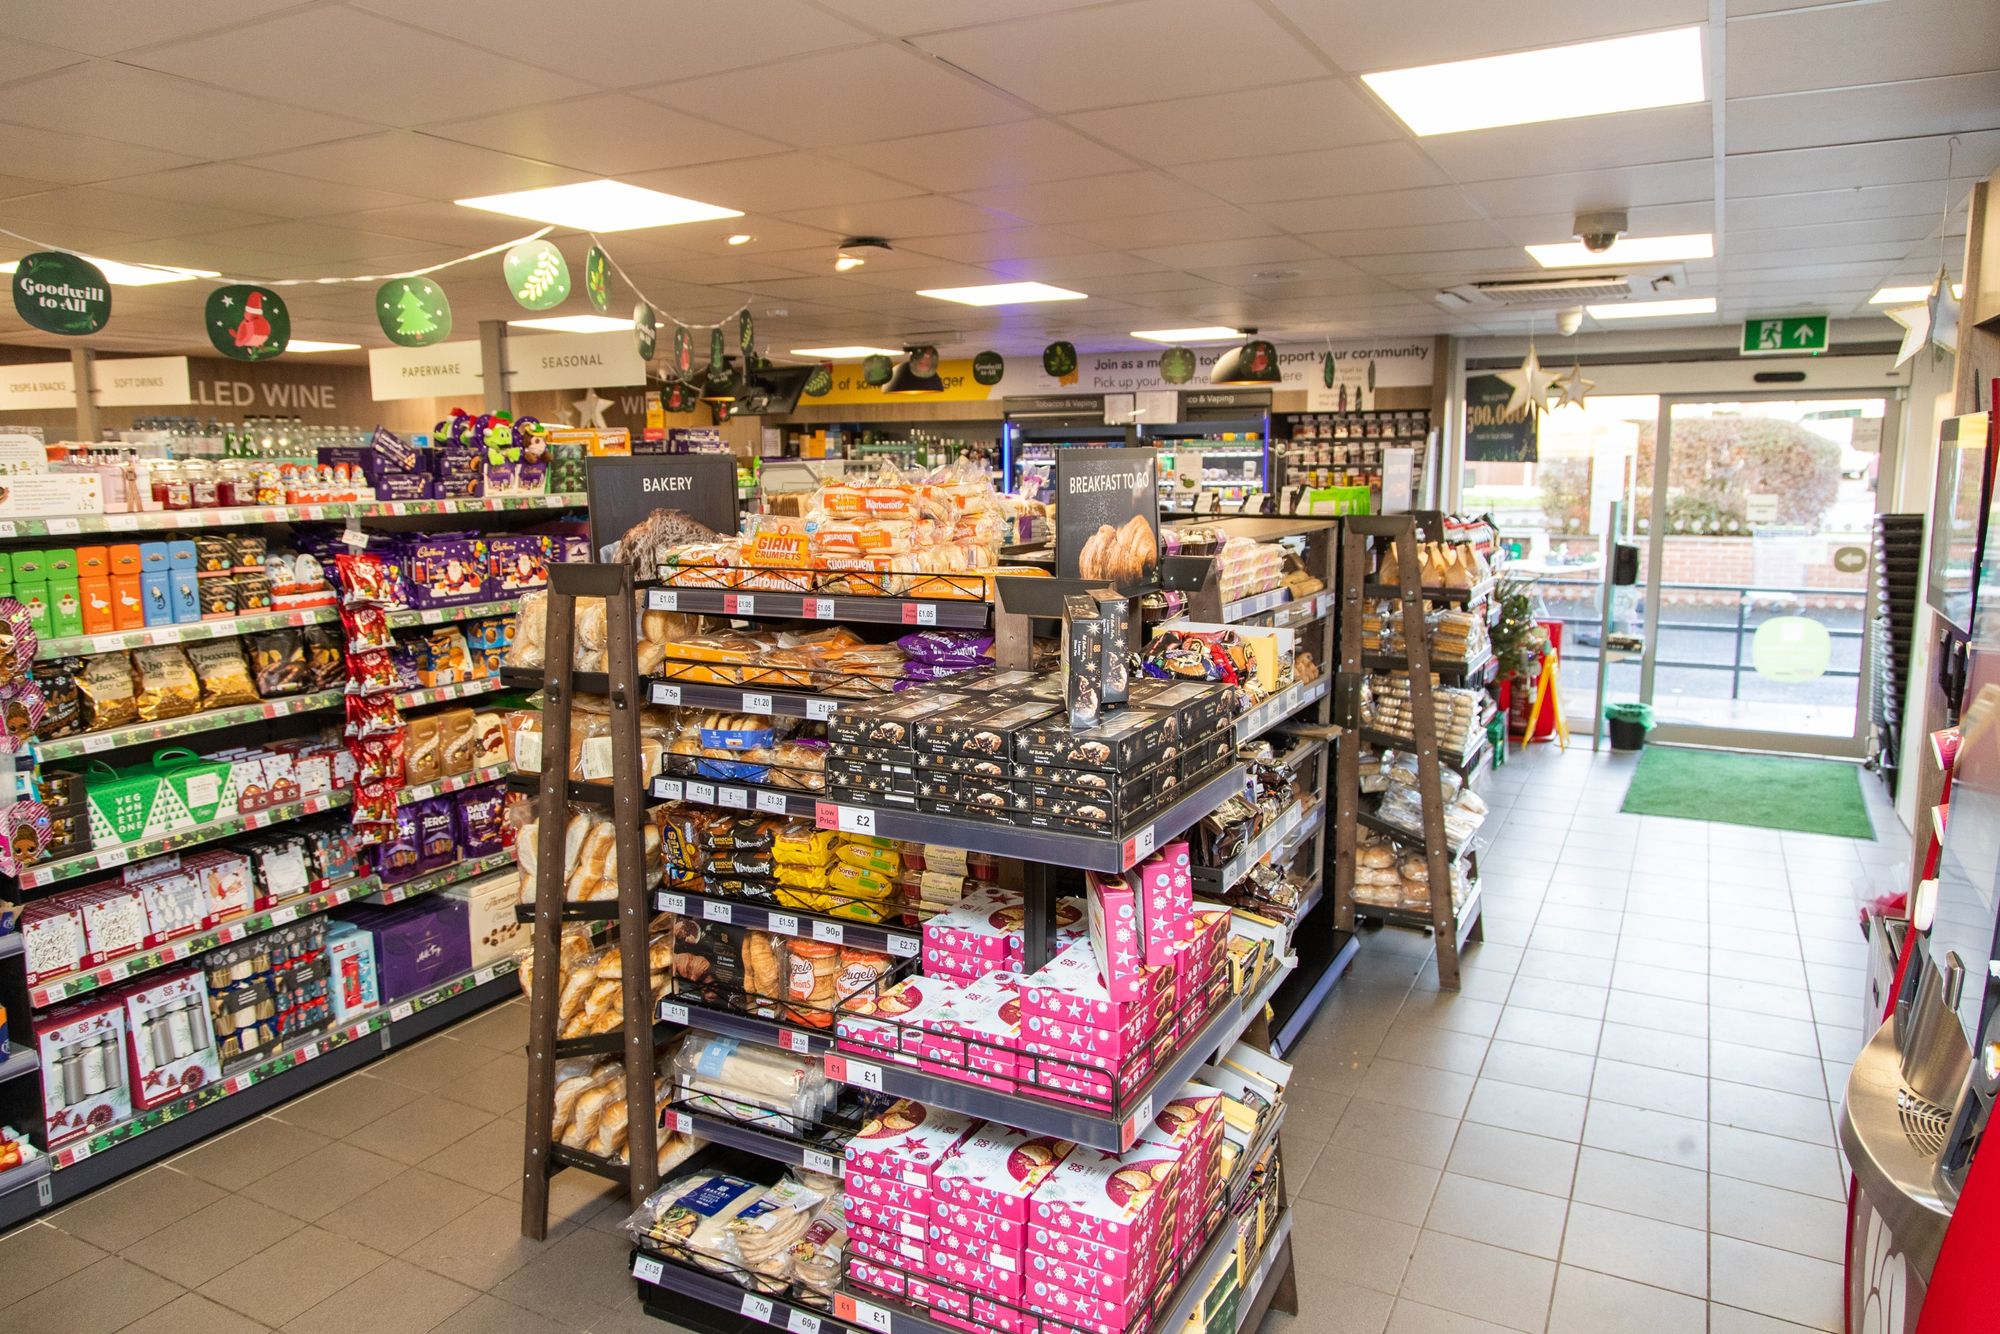 Brand new look for Derby food store after £166k investment